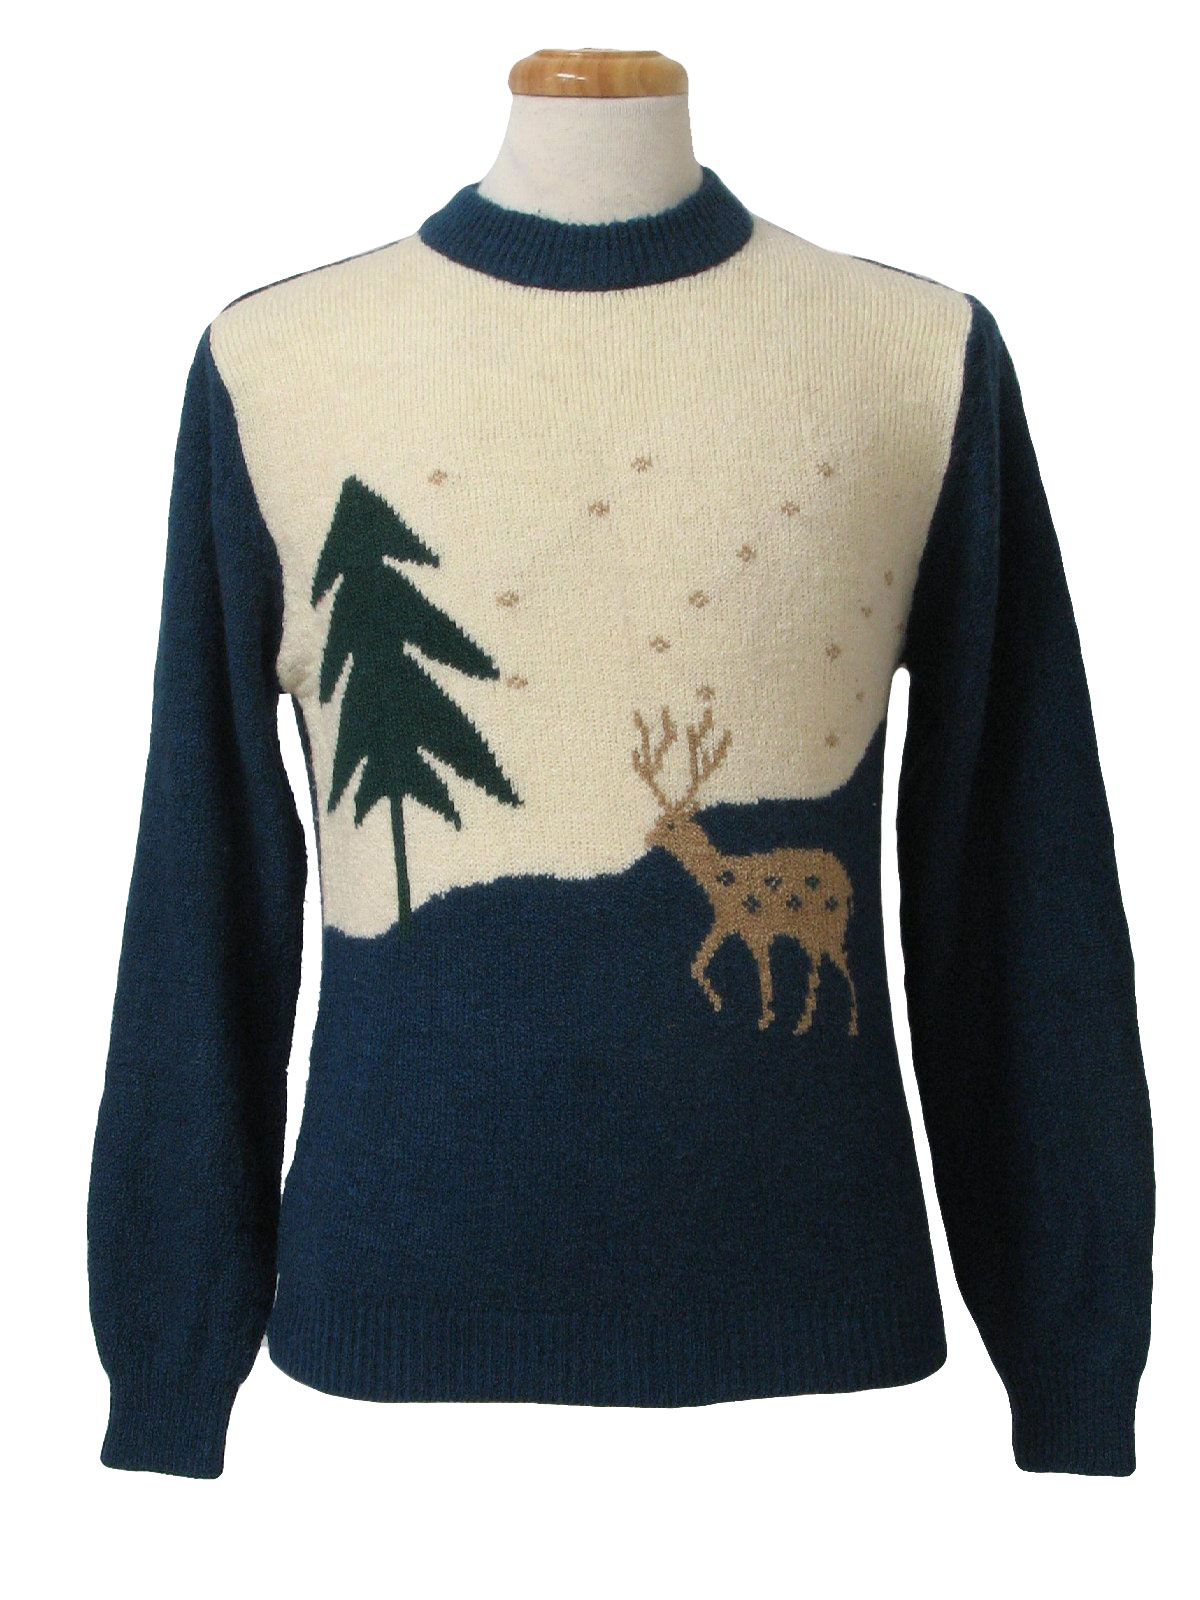 JCPenney Mens Ugly Christmas Sweater: 70s authentic vintage -JCPenney ...